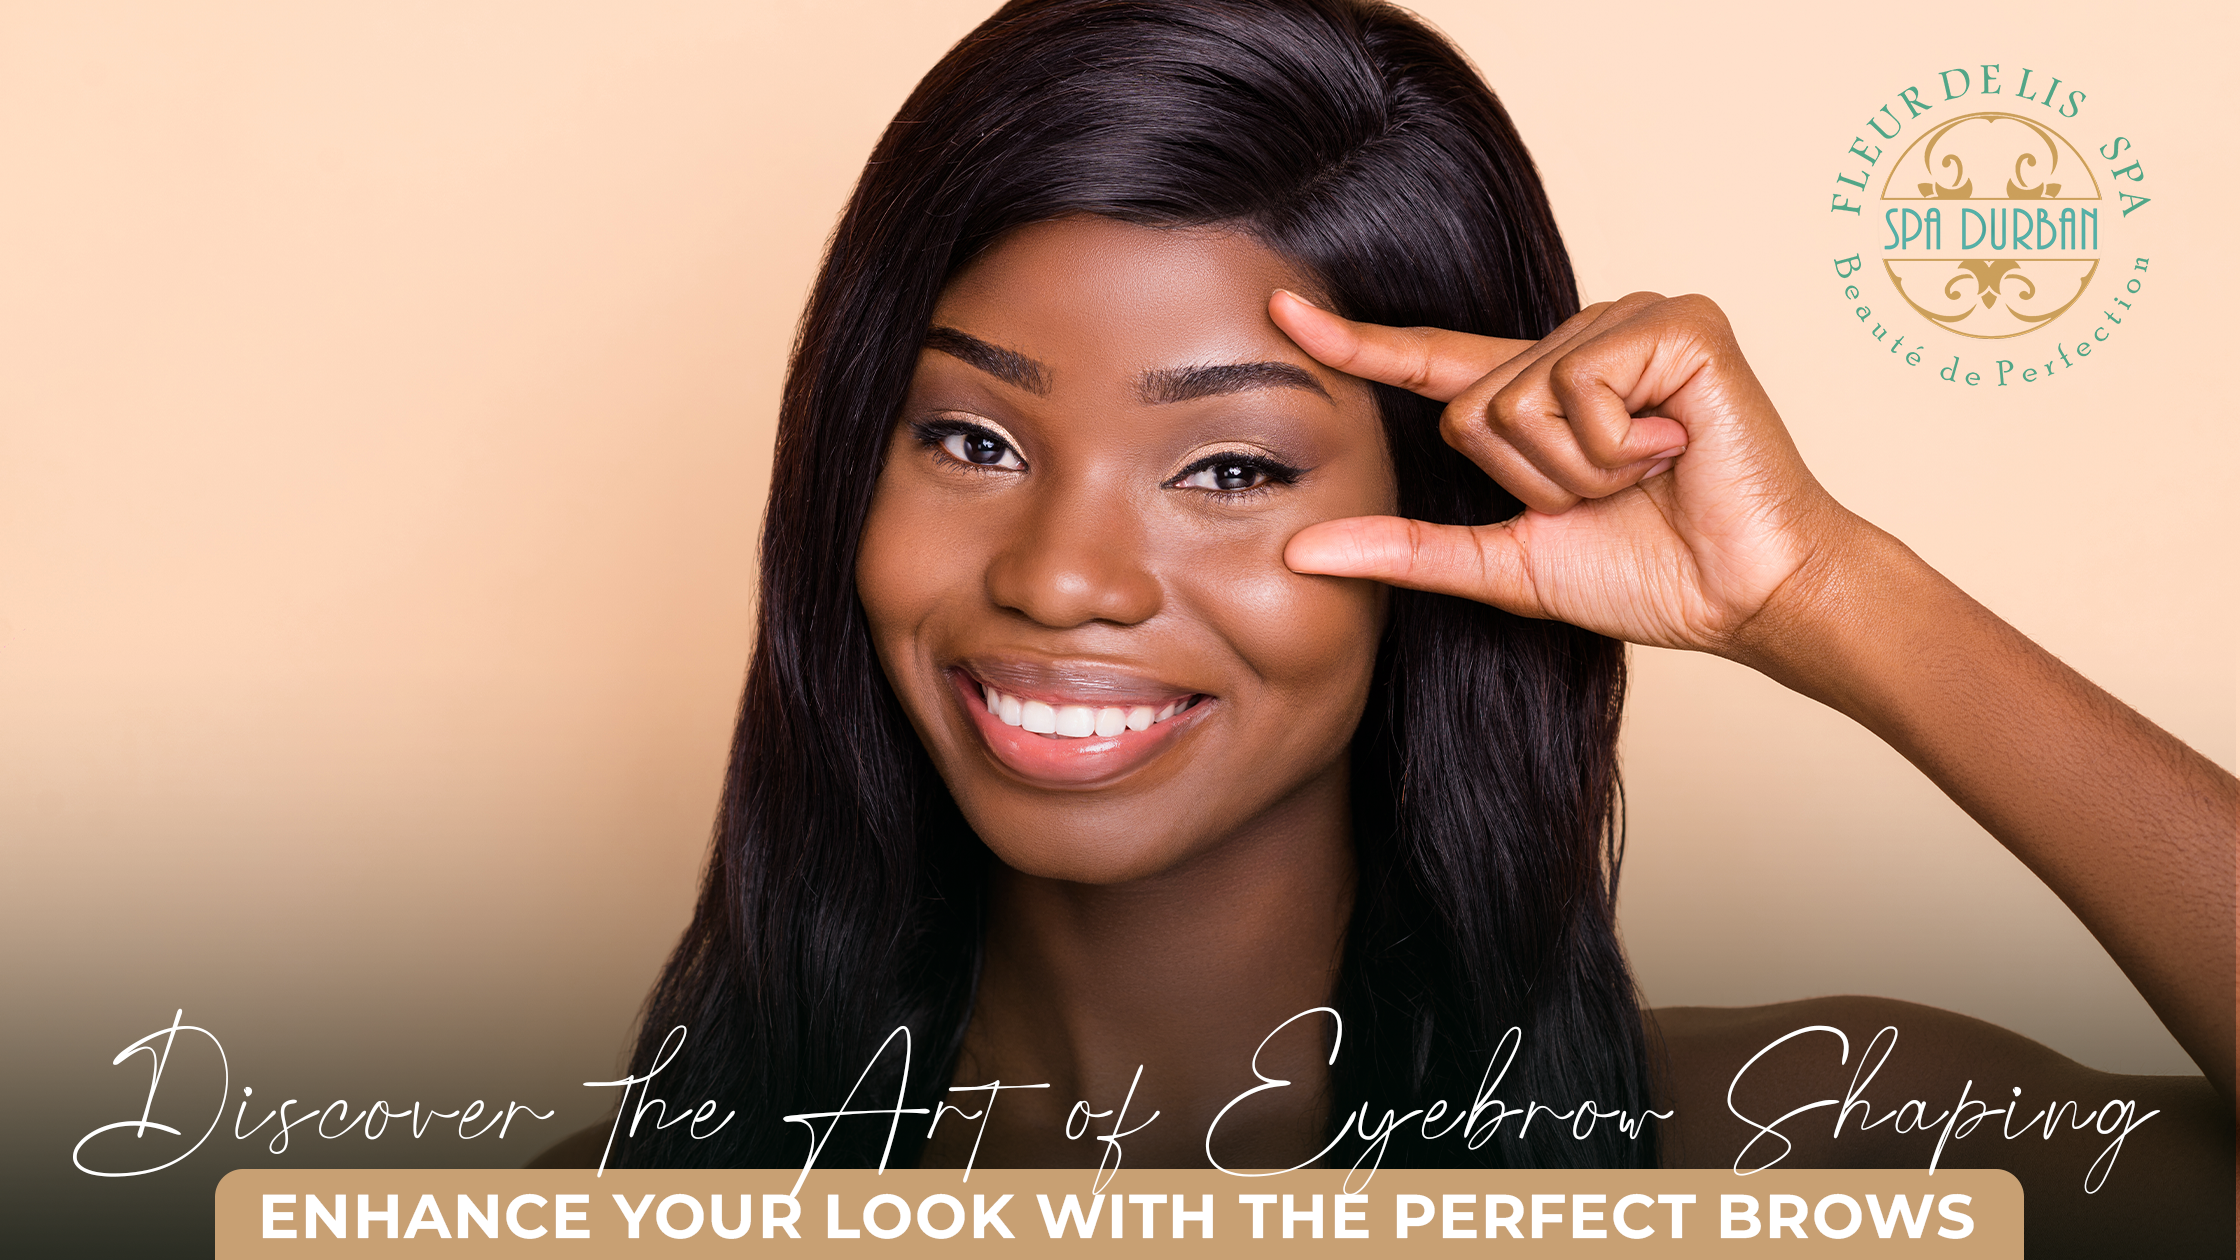 Discover the Art of Eyebrow Shaping: Enhance Your Look with the Perfect Brows